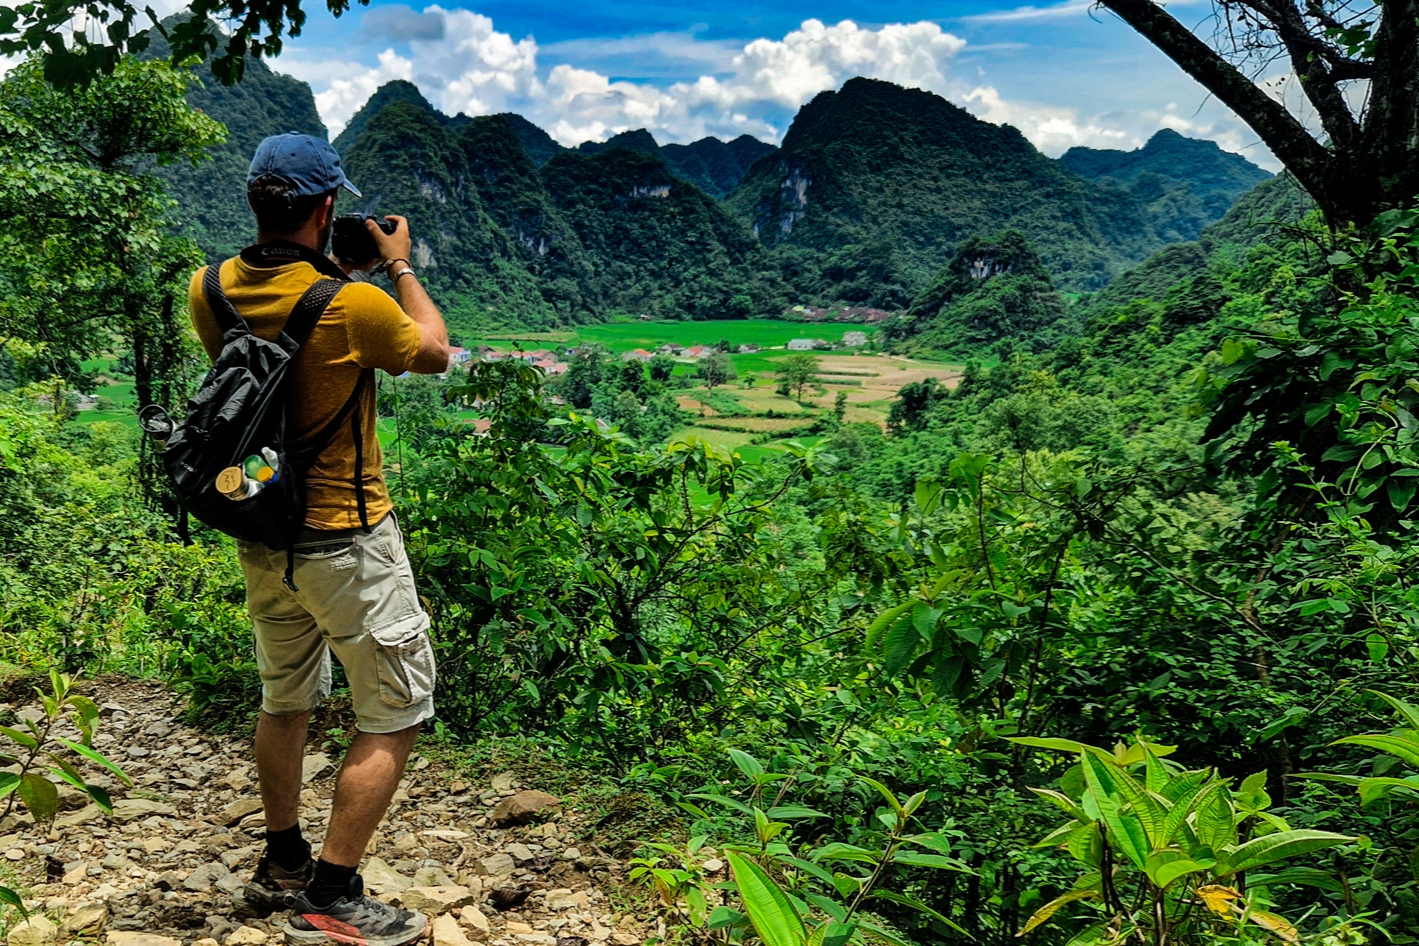 Hiking Gear And Equipment  The Essentials You Need For A Good Hike - Focus  Asia and Vietnam Travel & Leisure